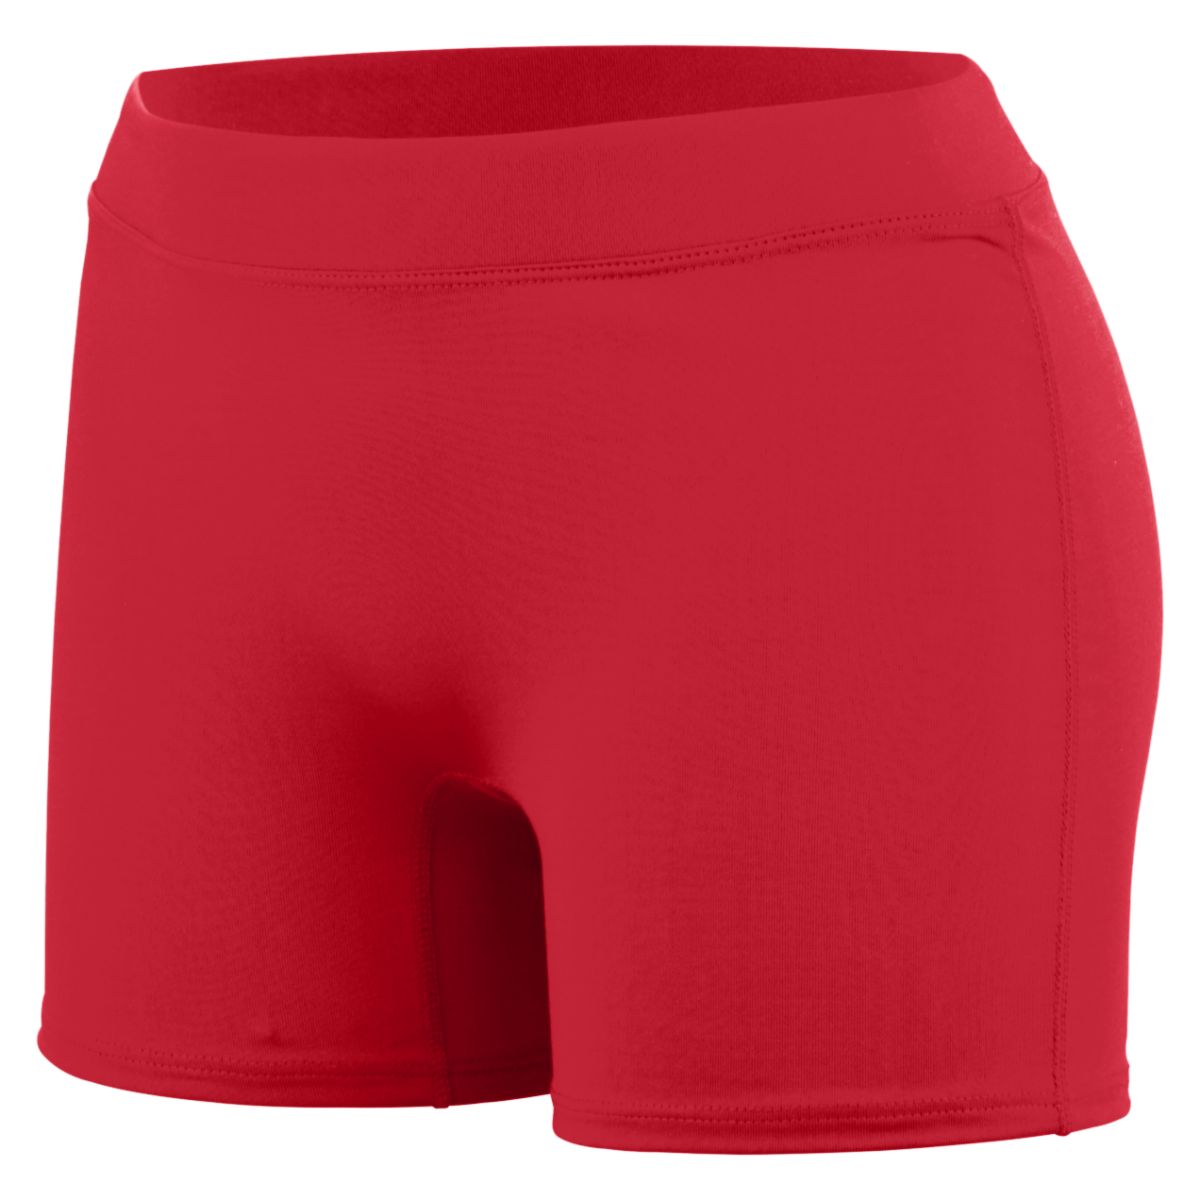 Augusta Sportswear Women's Enthuse Volleyball Short, Red, M - image 1 of 5